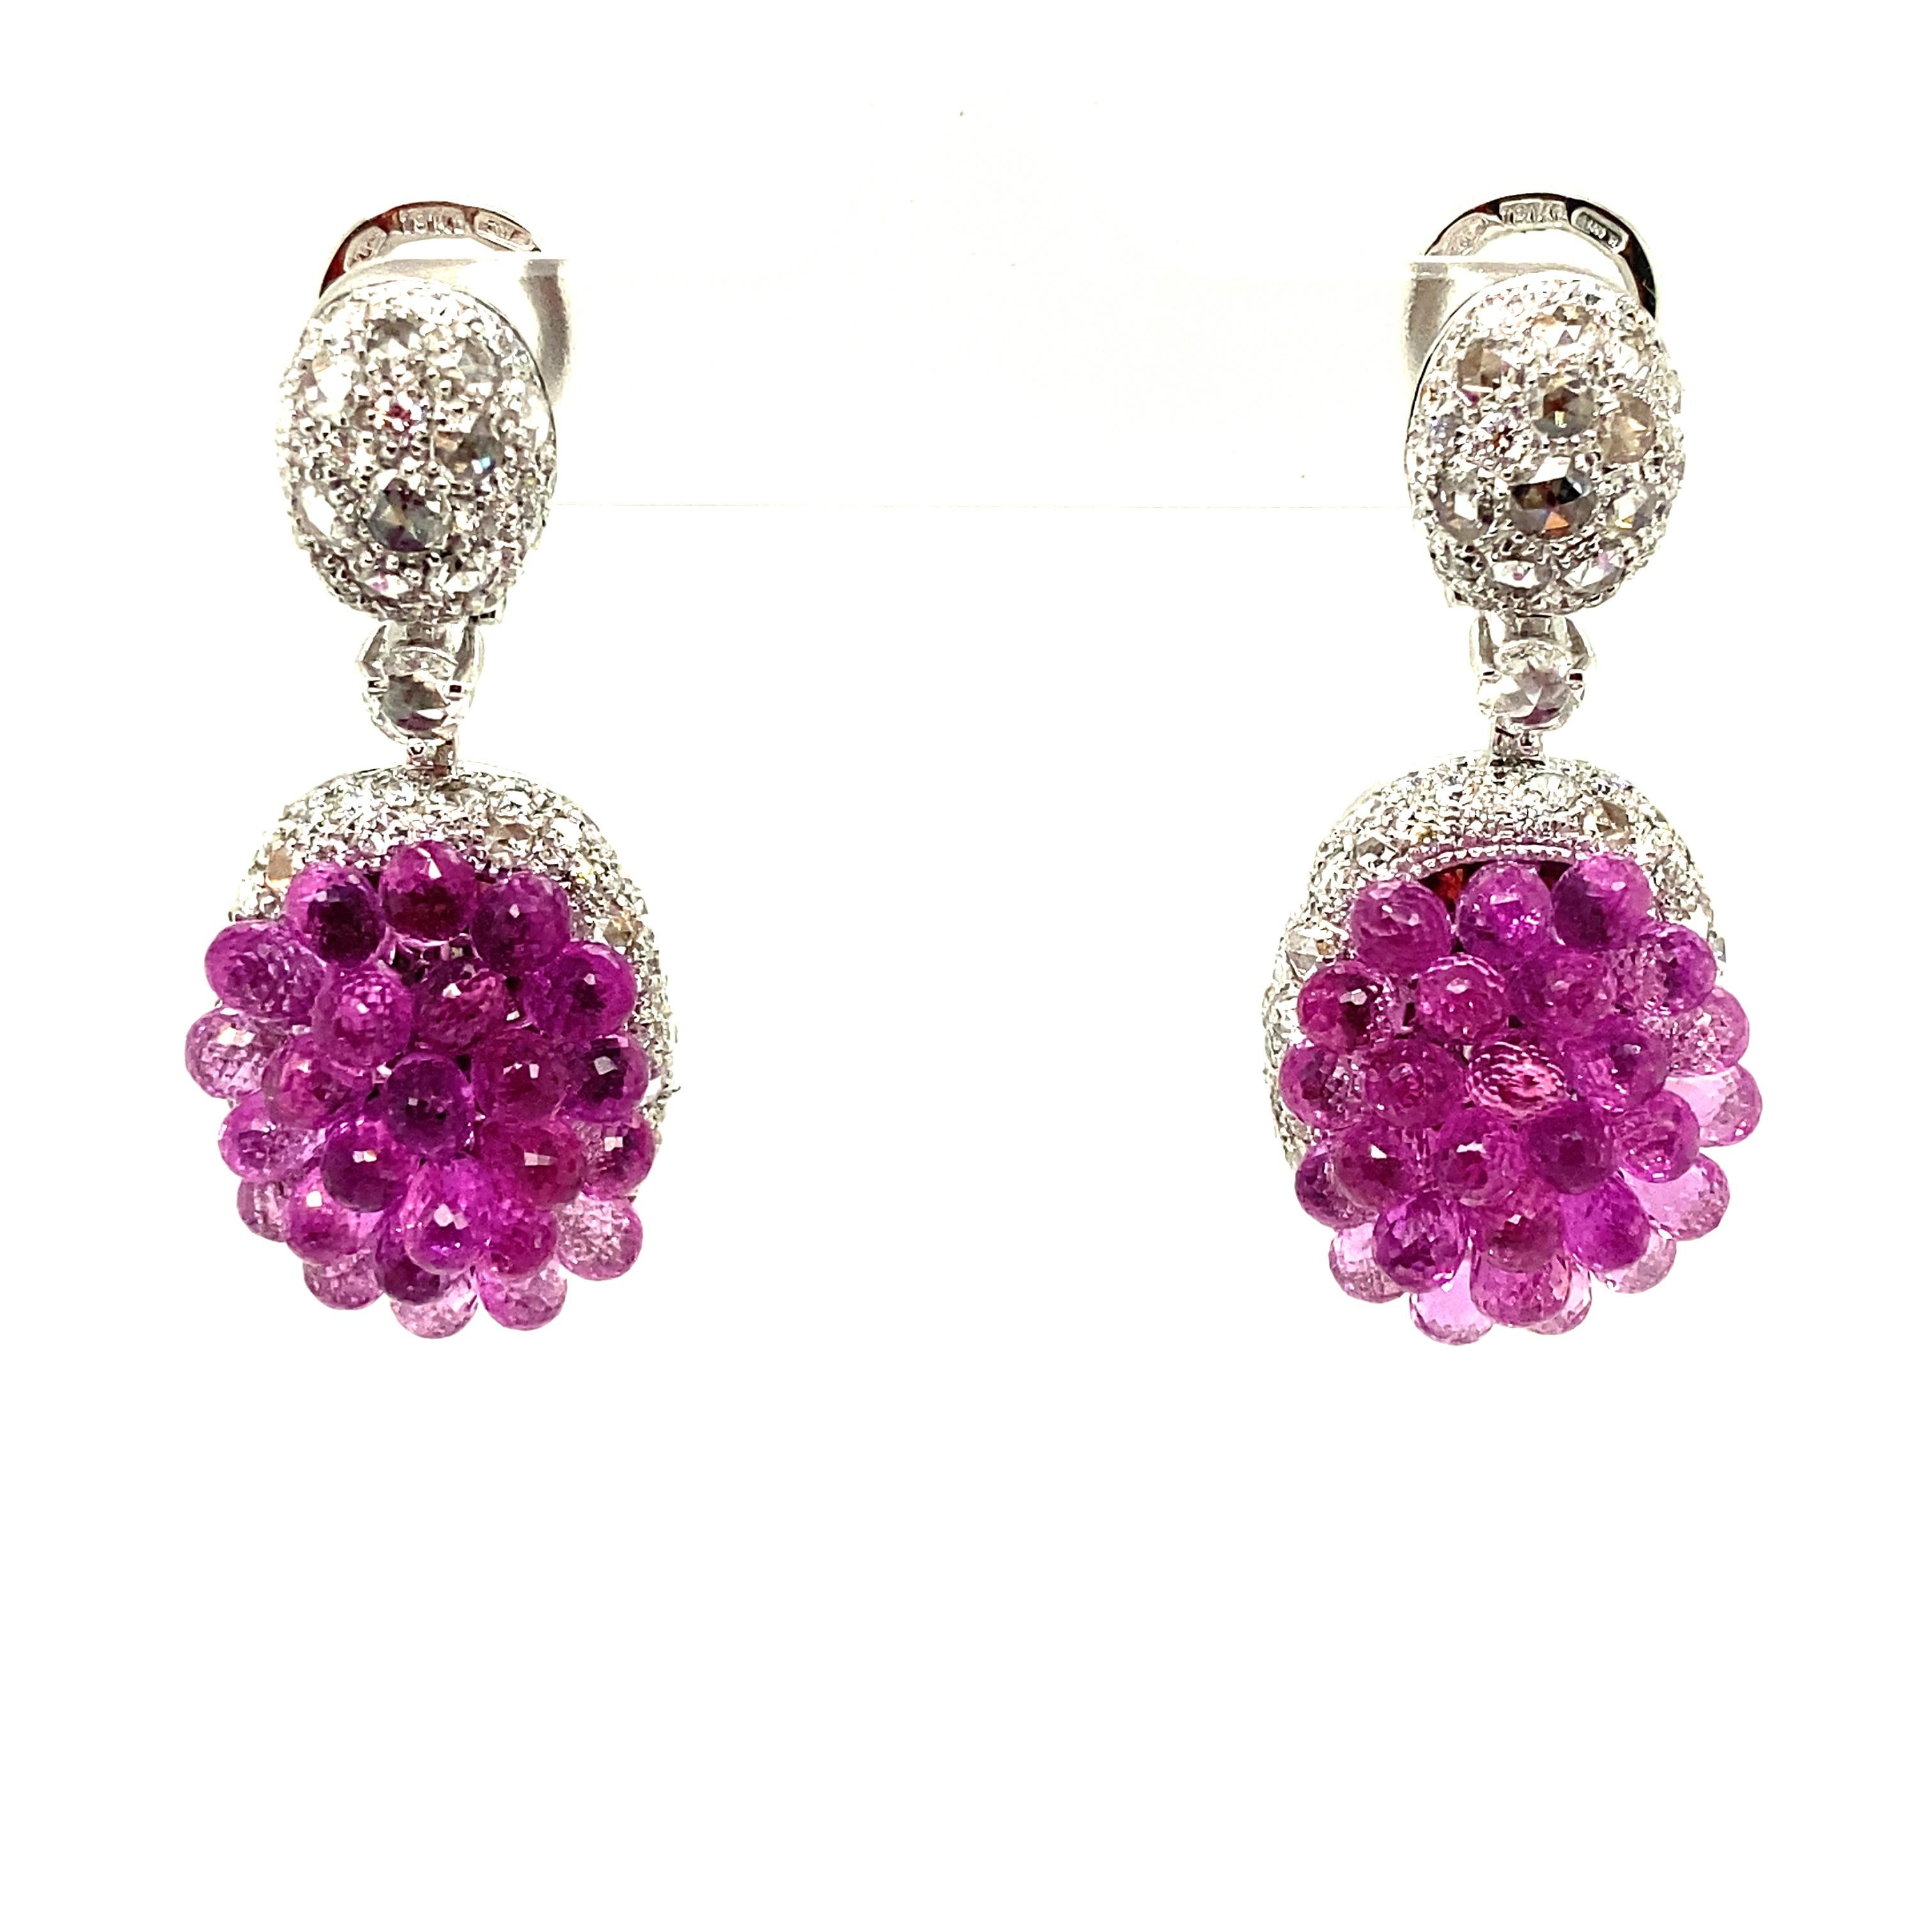 Modern 26 Carat Briolette-Cut Pink Sapphires and White Diamond Gold Dangle Earrings For Sale